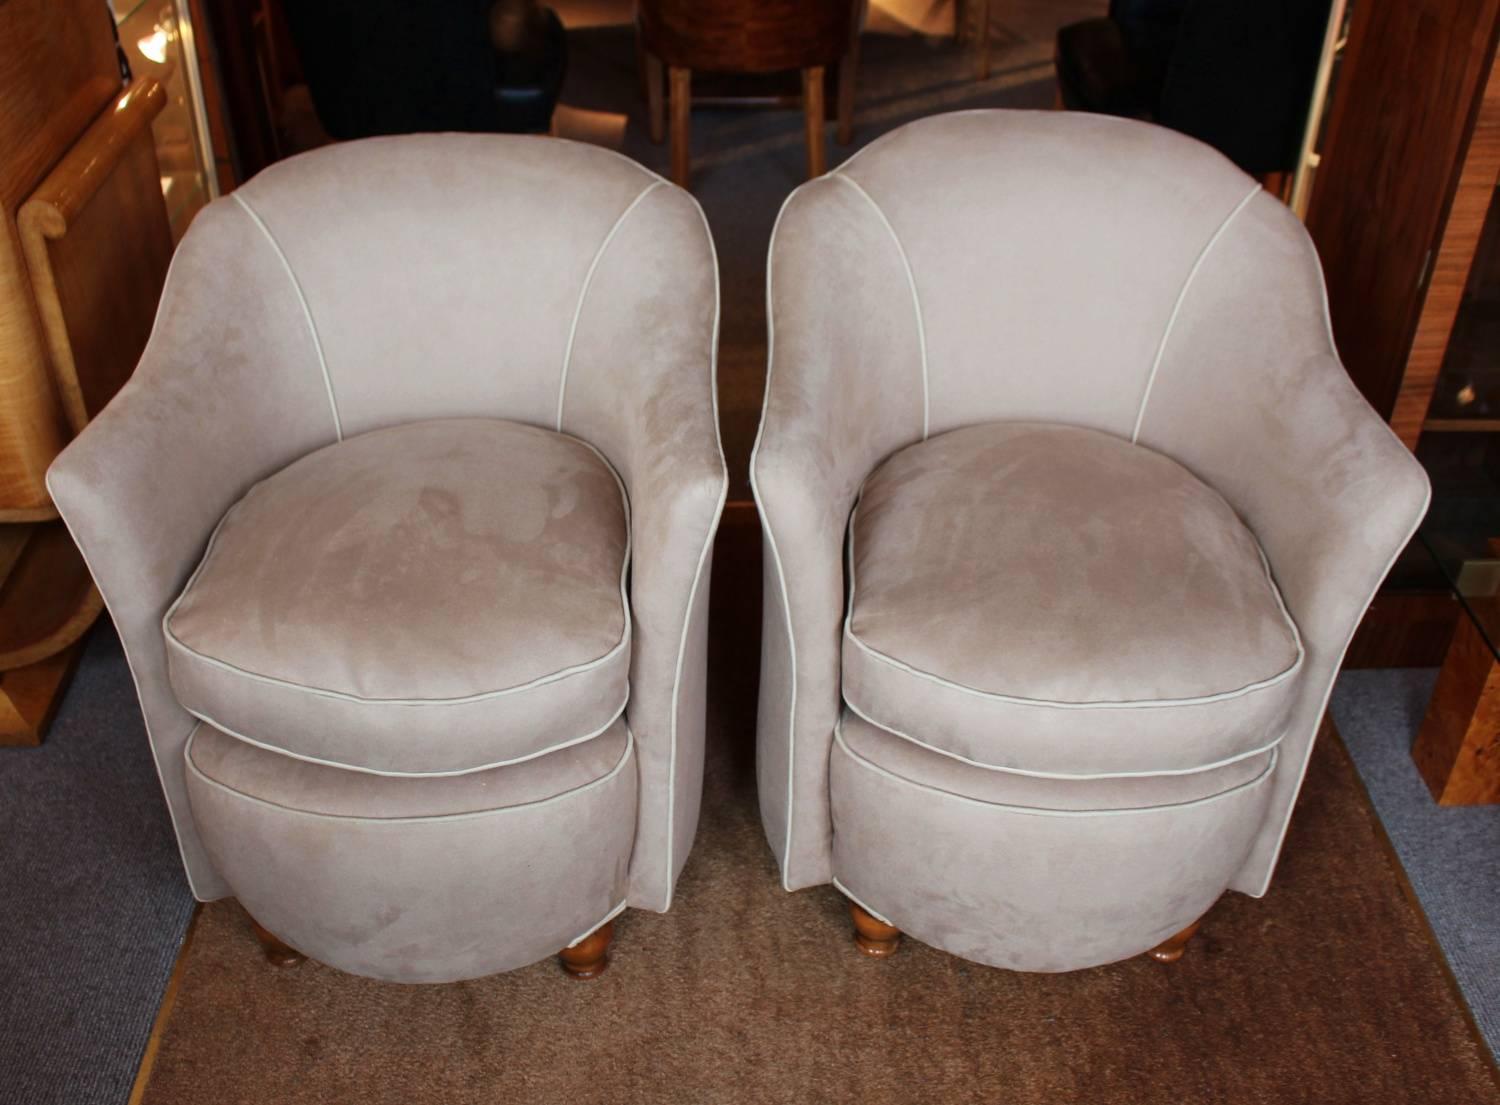 A pair of Art Deco tub chairs with shaped arms and turned wood legs. Upholstered in alcantara suede with contrast piping.

Measures: H 76cm, W 66cm, D 66cm, seat H 48cm, seat D 56cm.

 